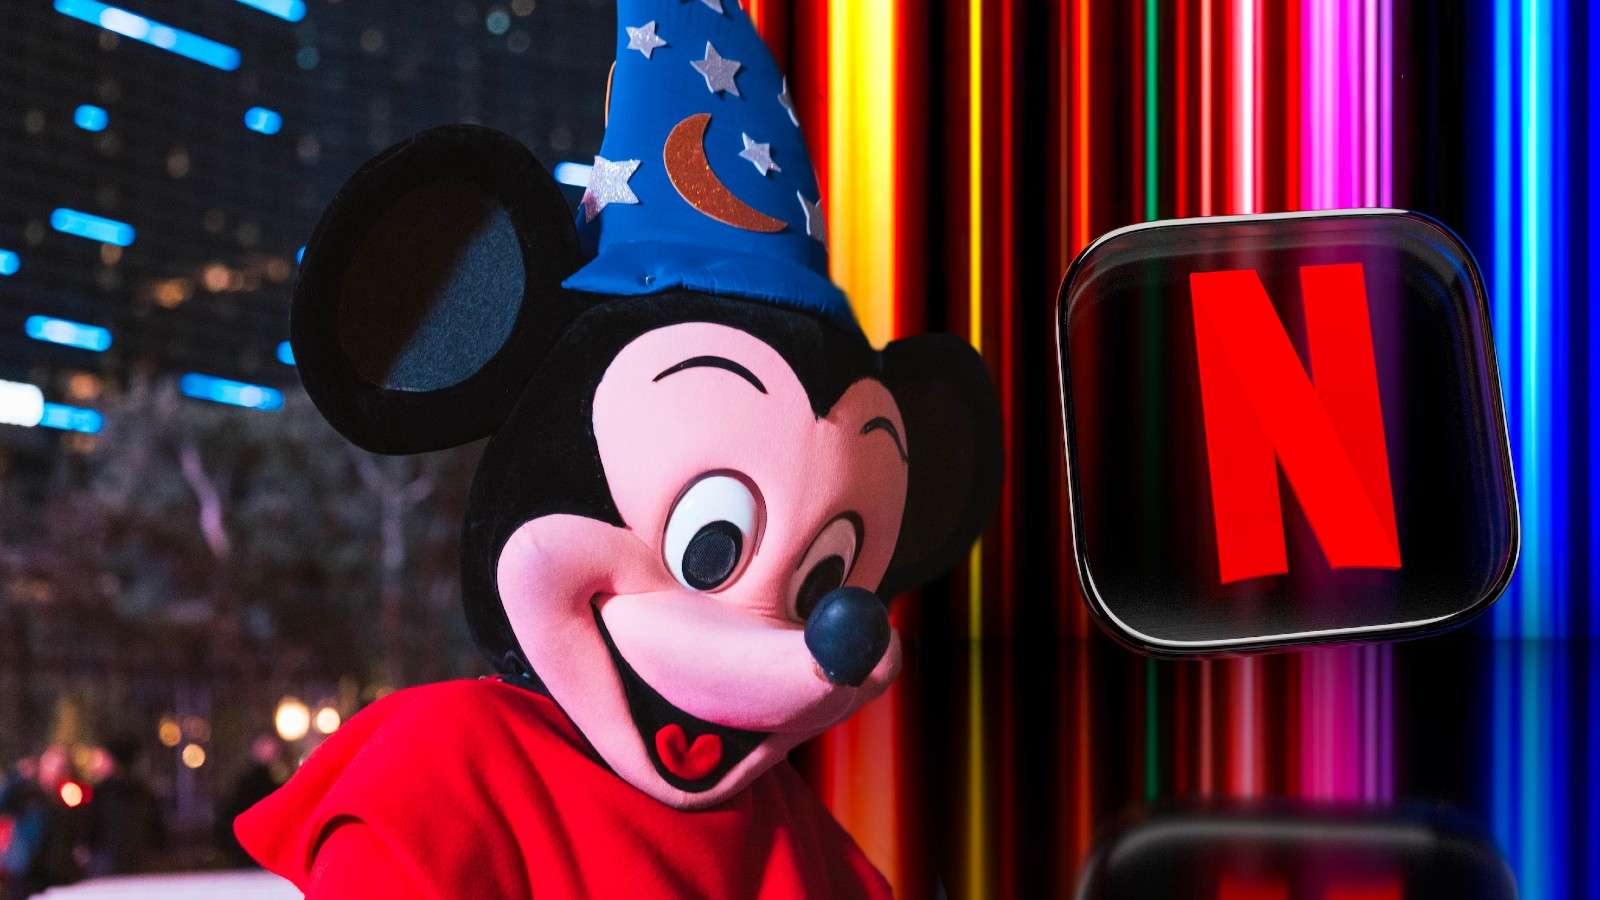 Stock image of Mickey Mouse at Disneyland and the Netflix logo